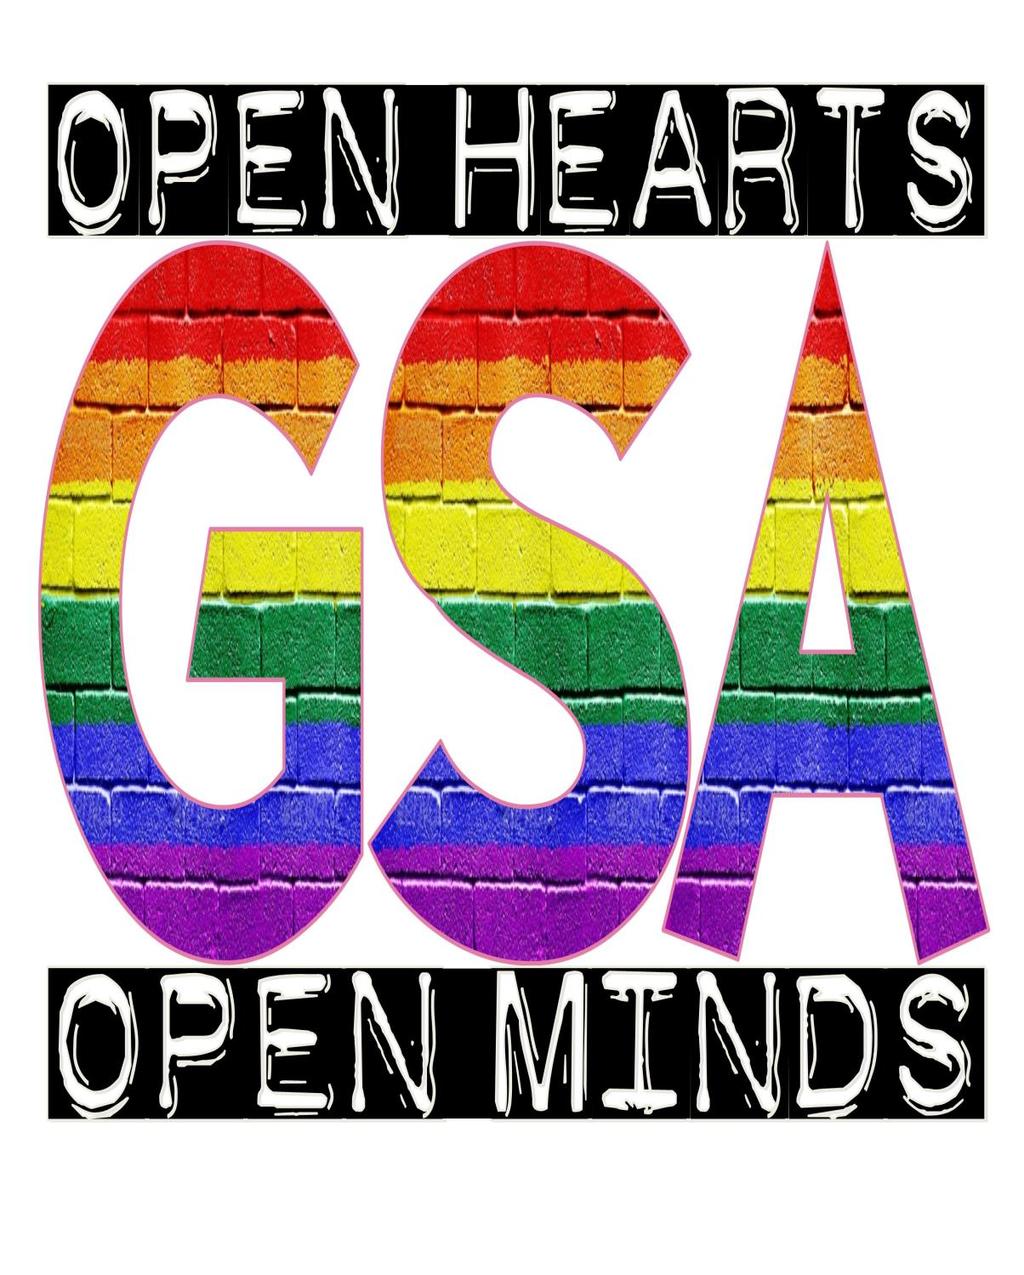 GSA will have a meeting on Thursday, March 28 2:15pm